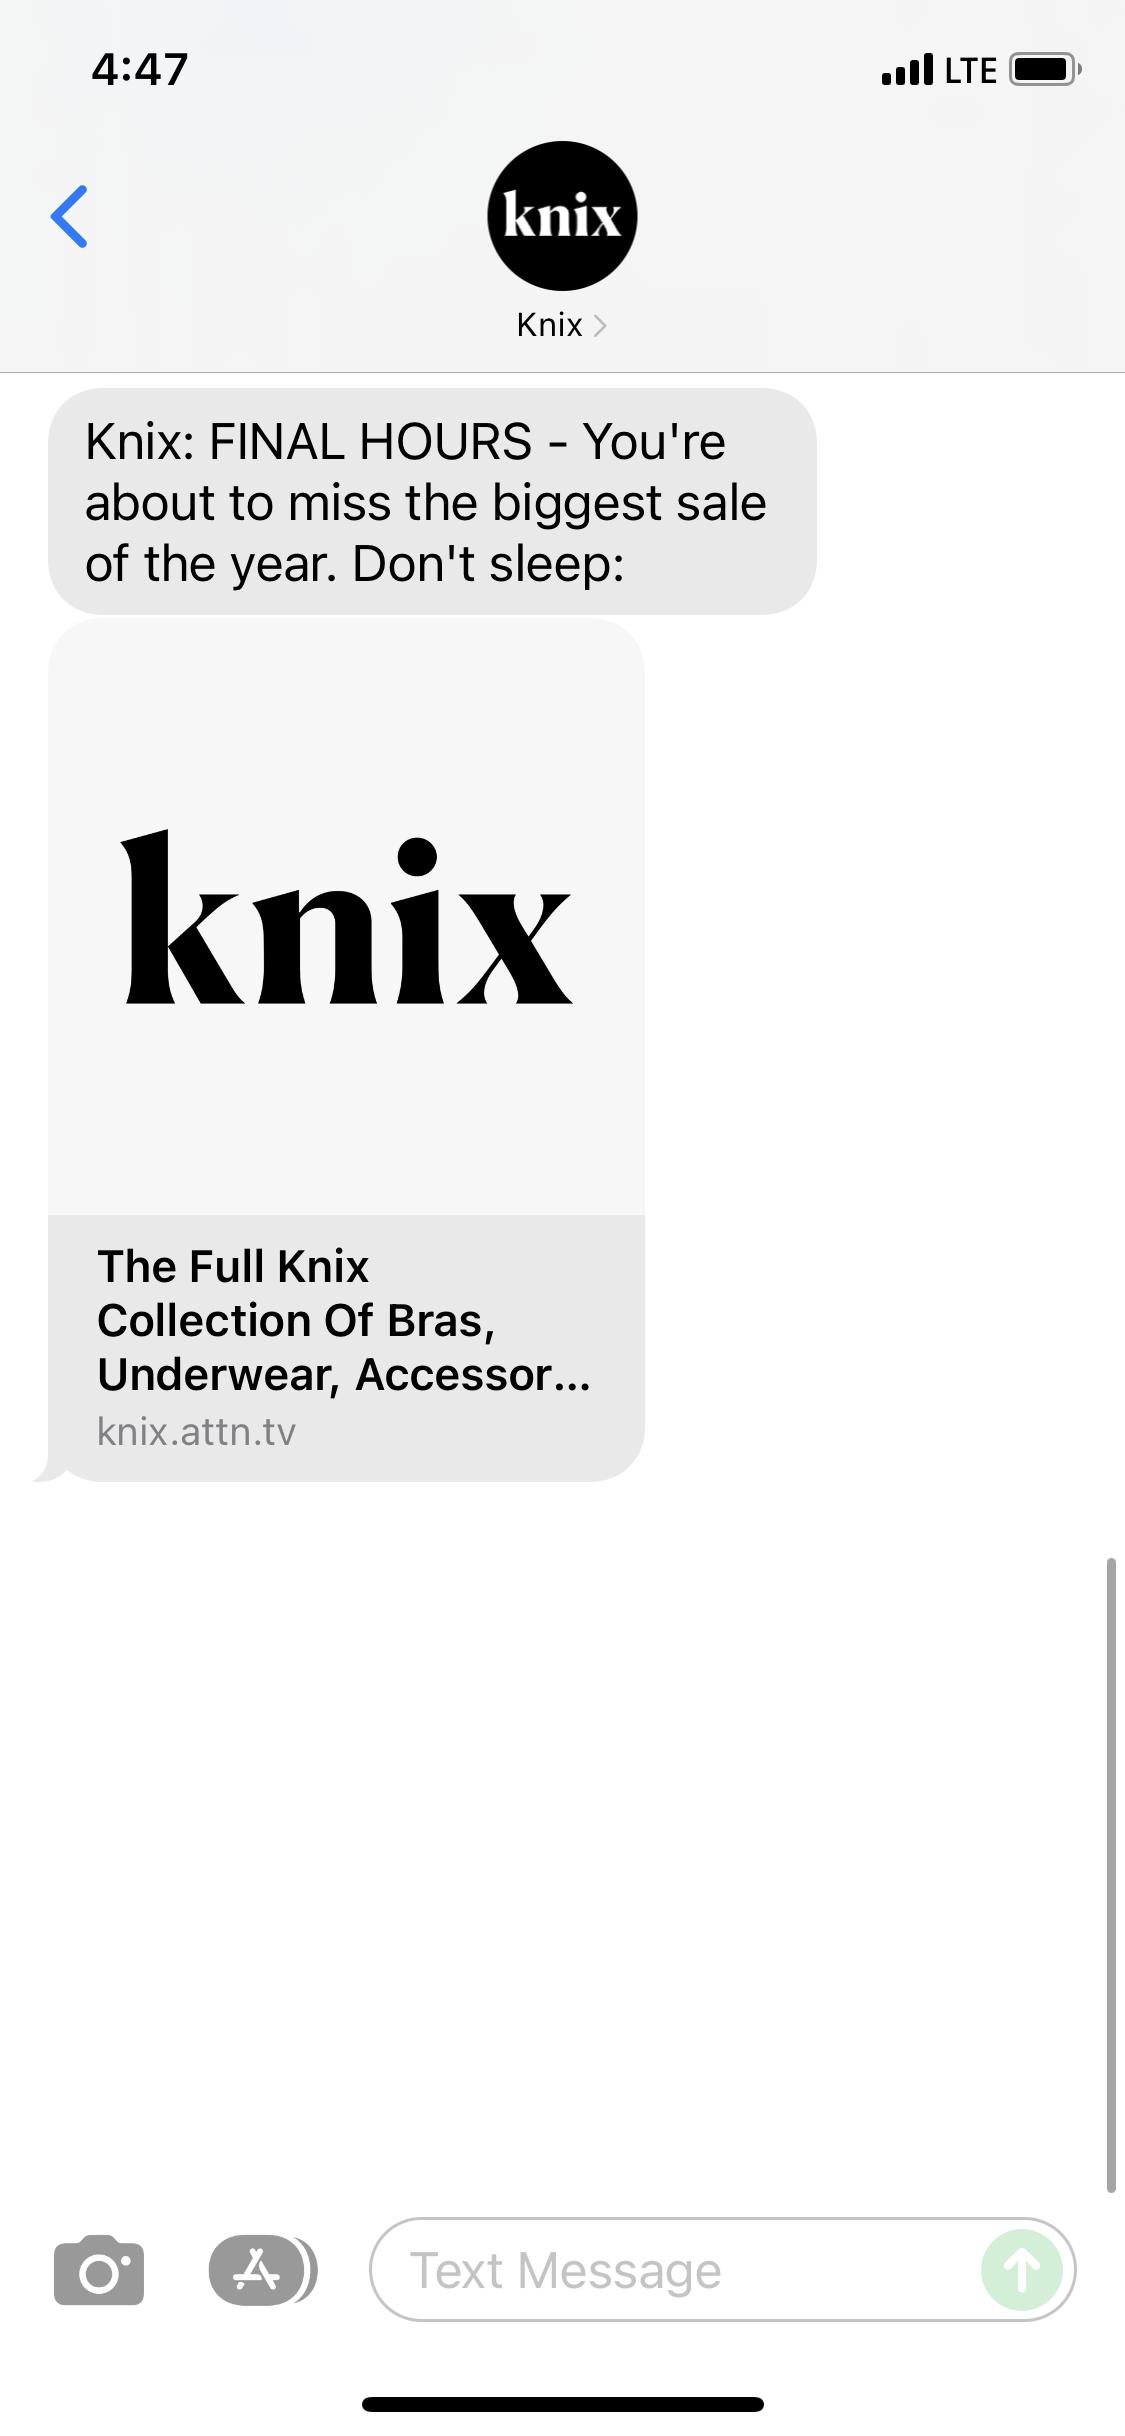 Knix Text Message Marketing Example – 08.22.2021